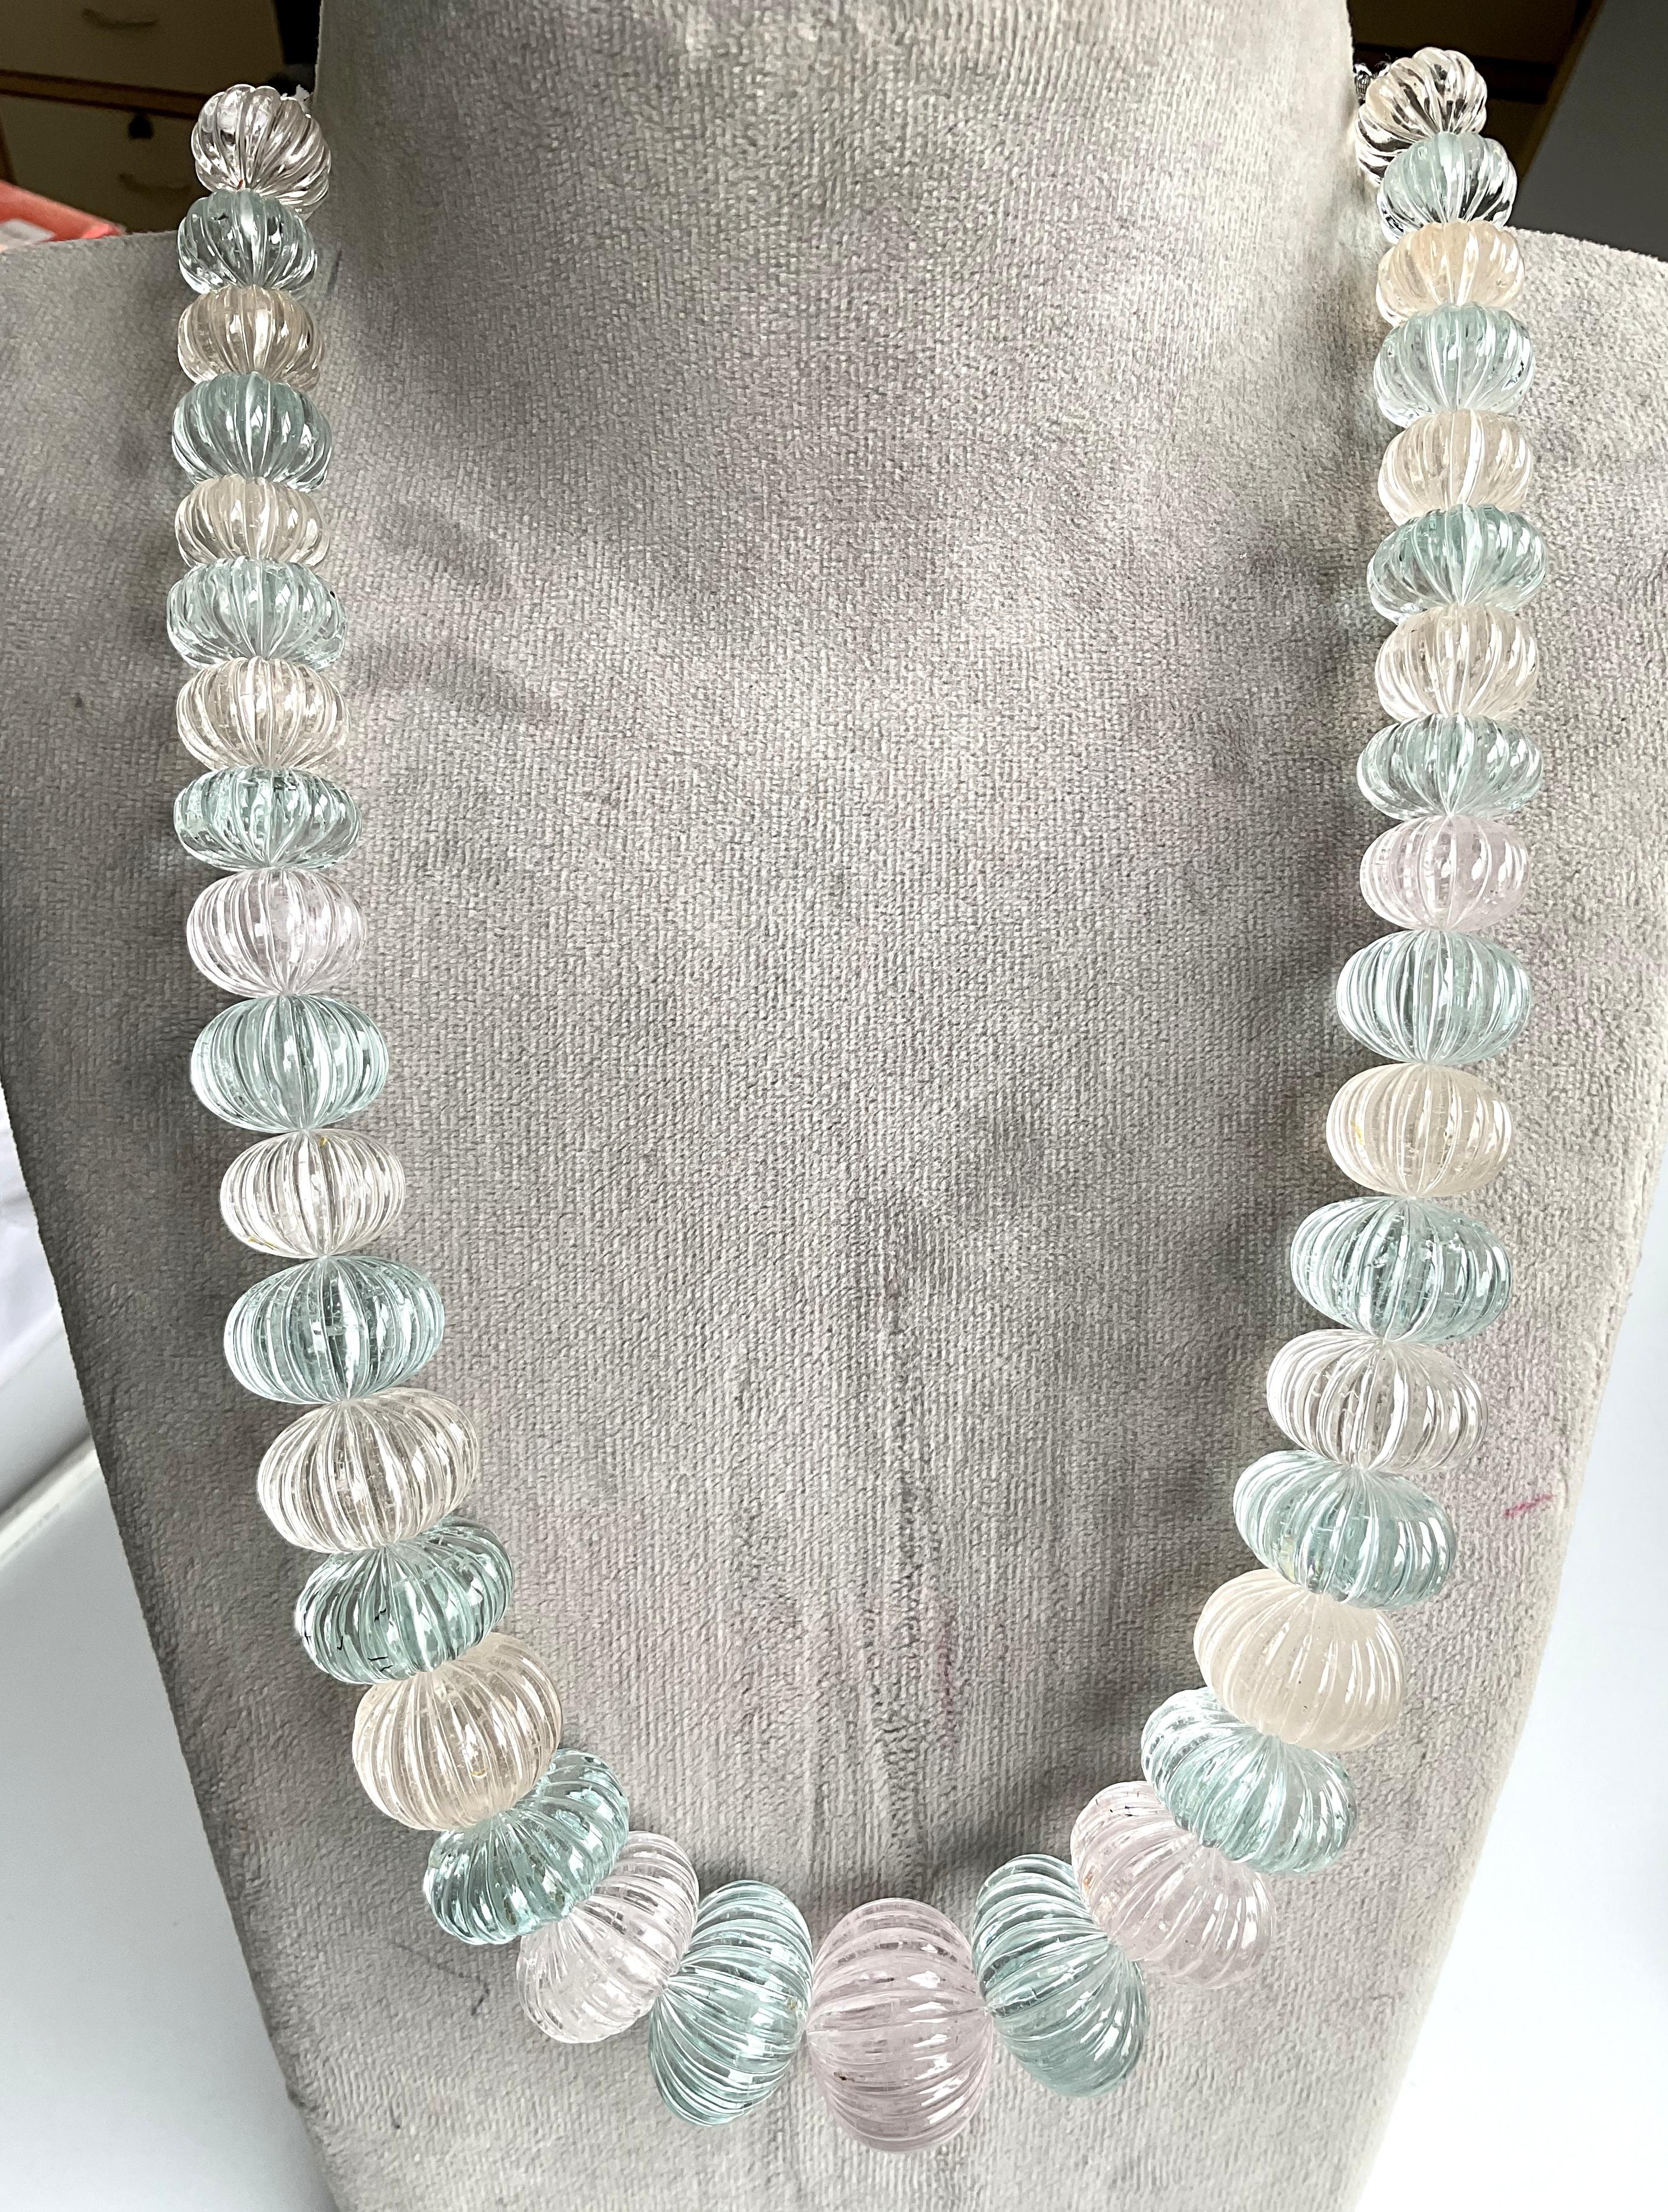 Aquamarine & Morganite Carved Melon Necklace For Fine Jewelry Gem

Gemstone - Aquamarine & Morganite
Weight: 1768.53Carats
Size: 16x28 MM
Strand - 1
